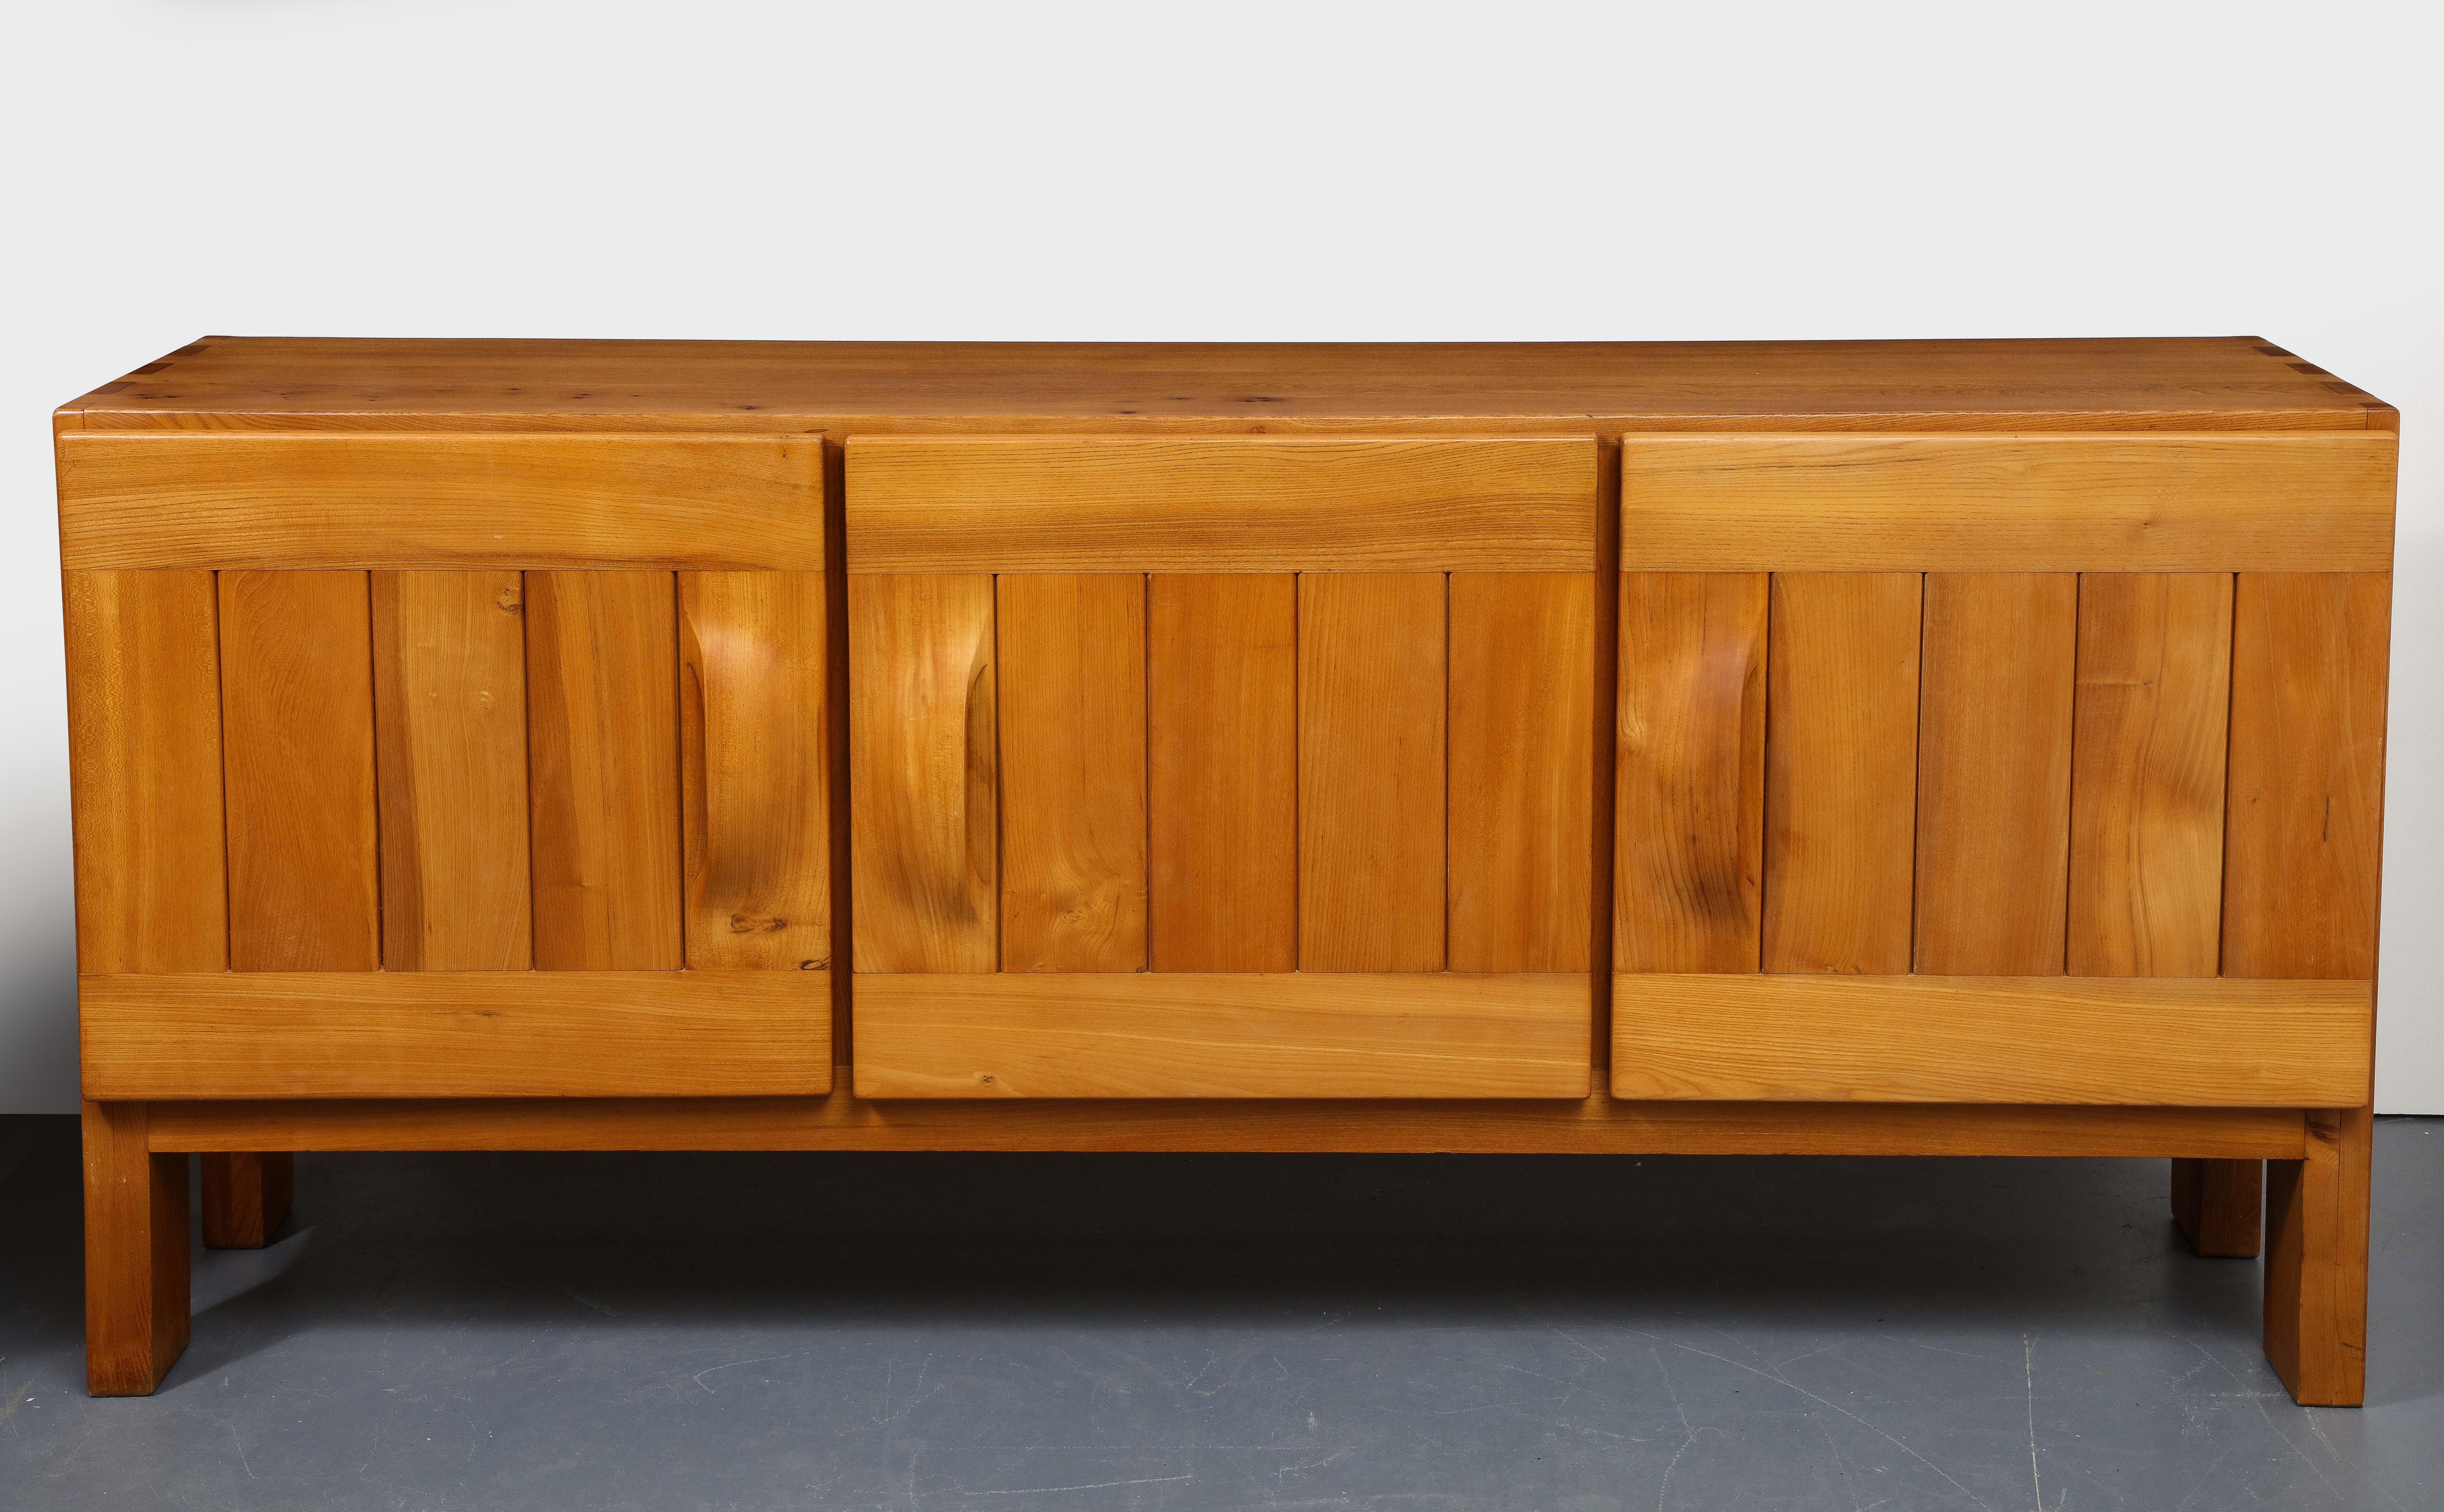 Elm Sideboard by Maison Regain, France, circa 1960s. 

This simple yet highly sophisticated sideboard consists of a solid elm construction, plank legs, and vertically-paneled doors with organically rounded, hand-carved handles. 

Excellent